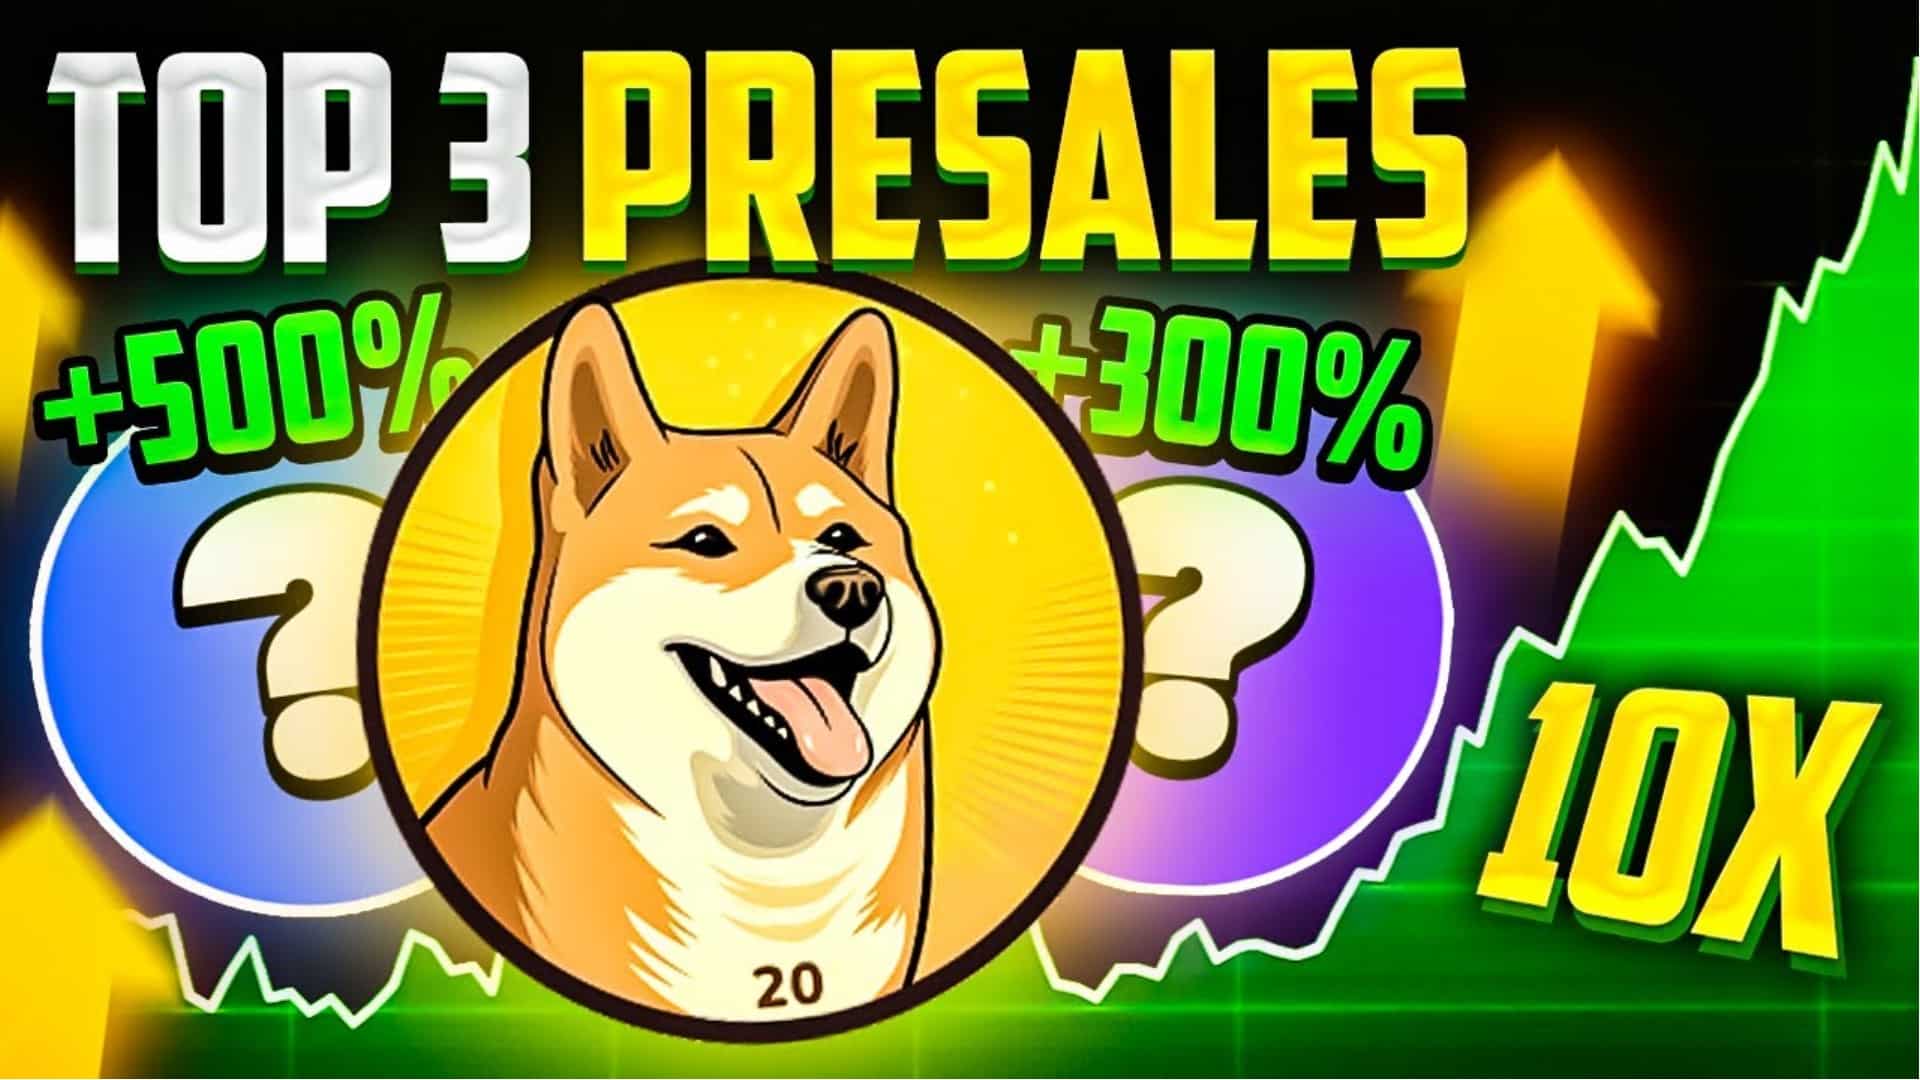 Top 3 Presale Opportunities For Potential 100x Gain $TUK, $GBTC, And $DOGE20